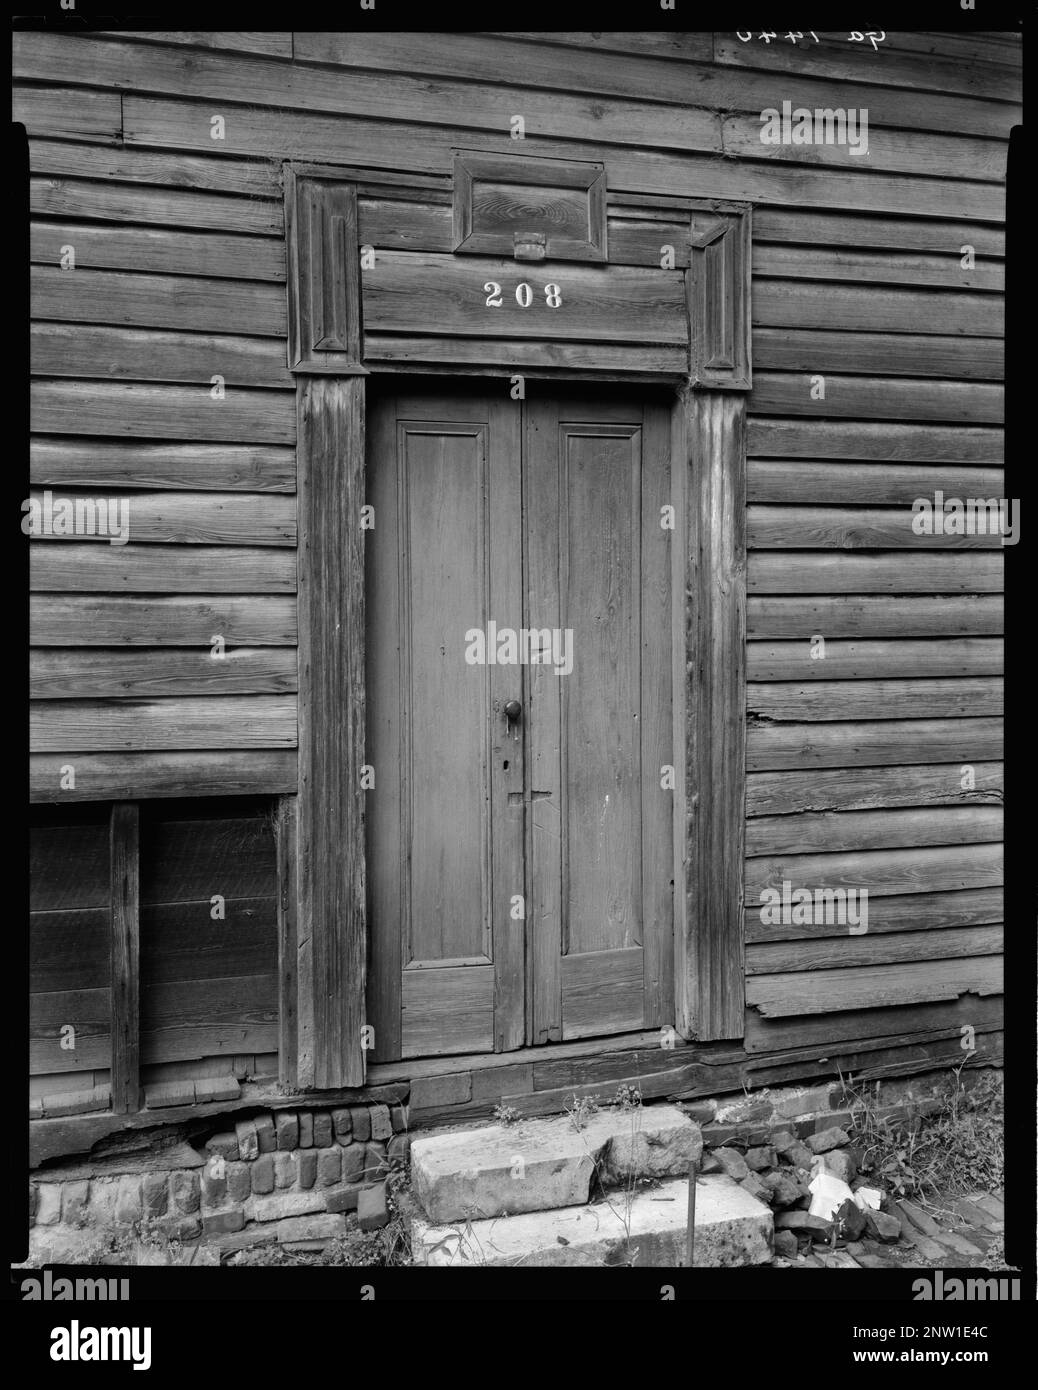 #208, Milledgeville, Baldwin County, Georgia. Carnegie Survey of the Architecture of the South. United States, Georgia, Baldwin County, Milledgeville,  Doors & doorways. Stock Photo